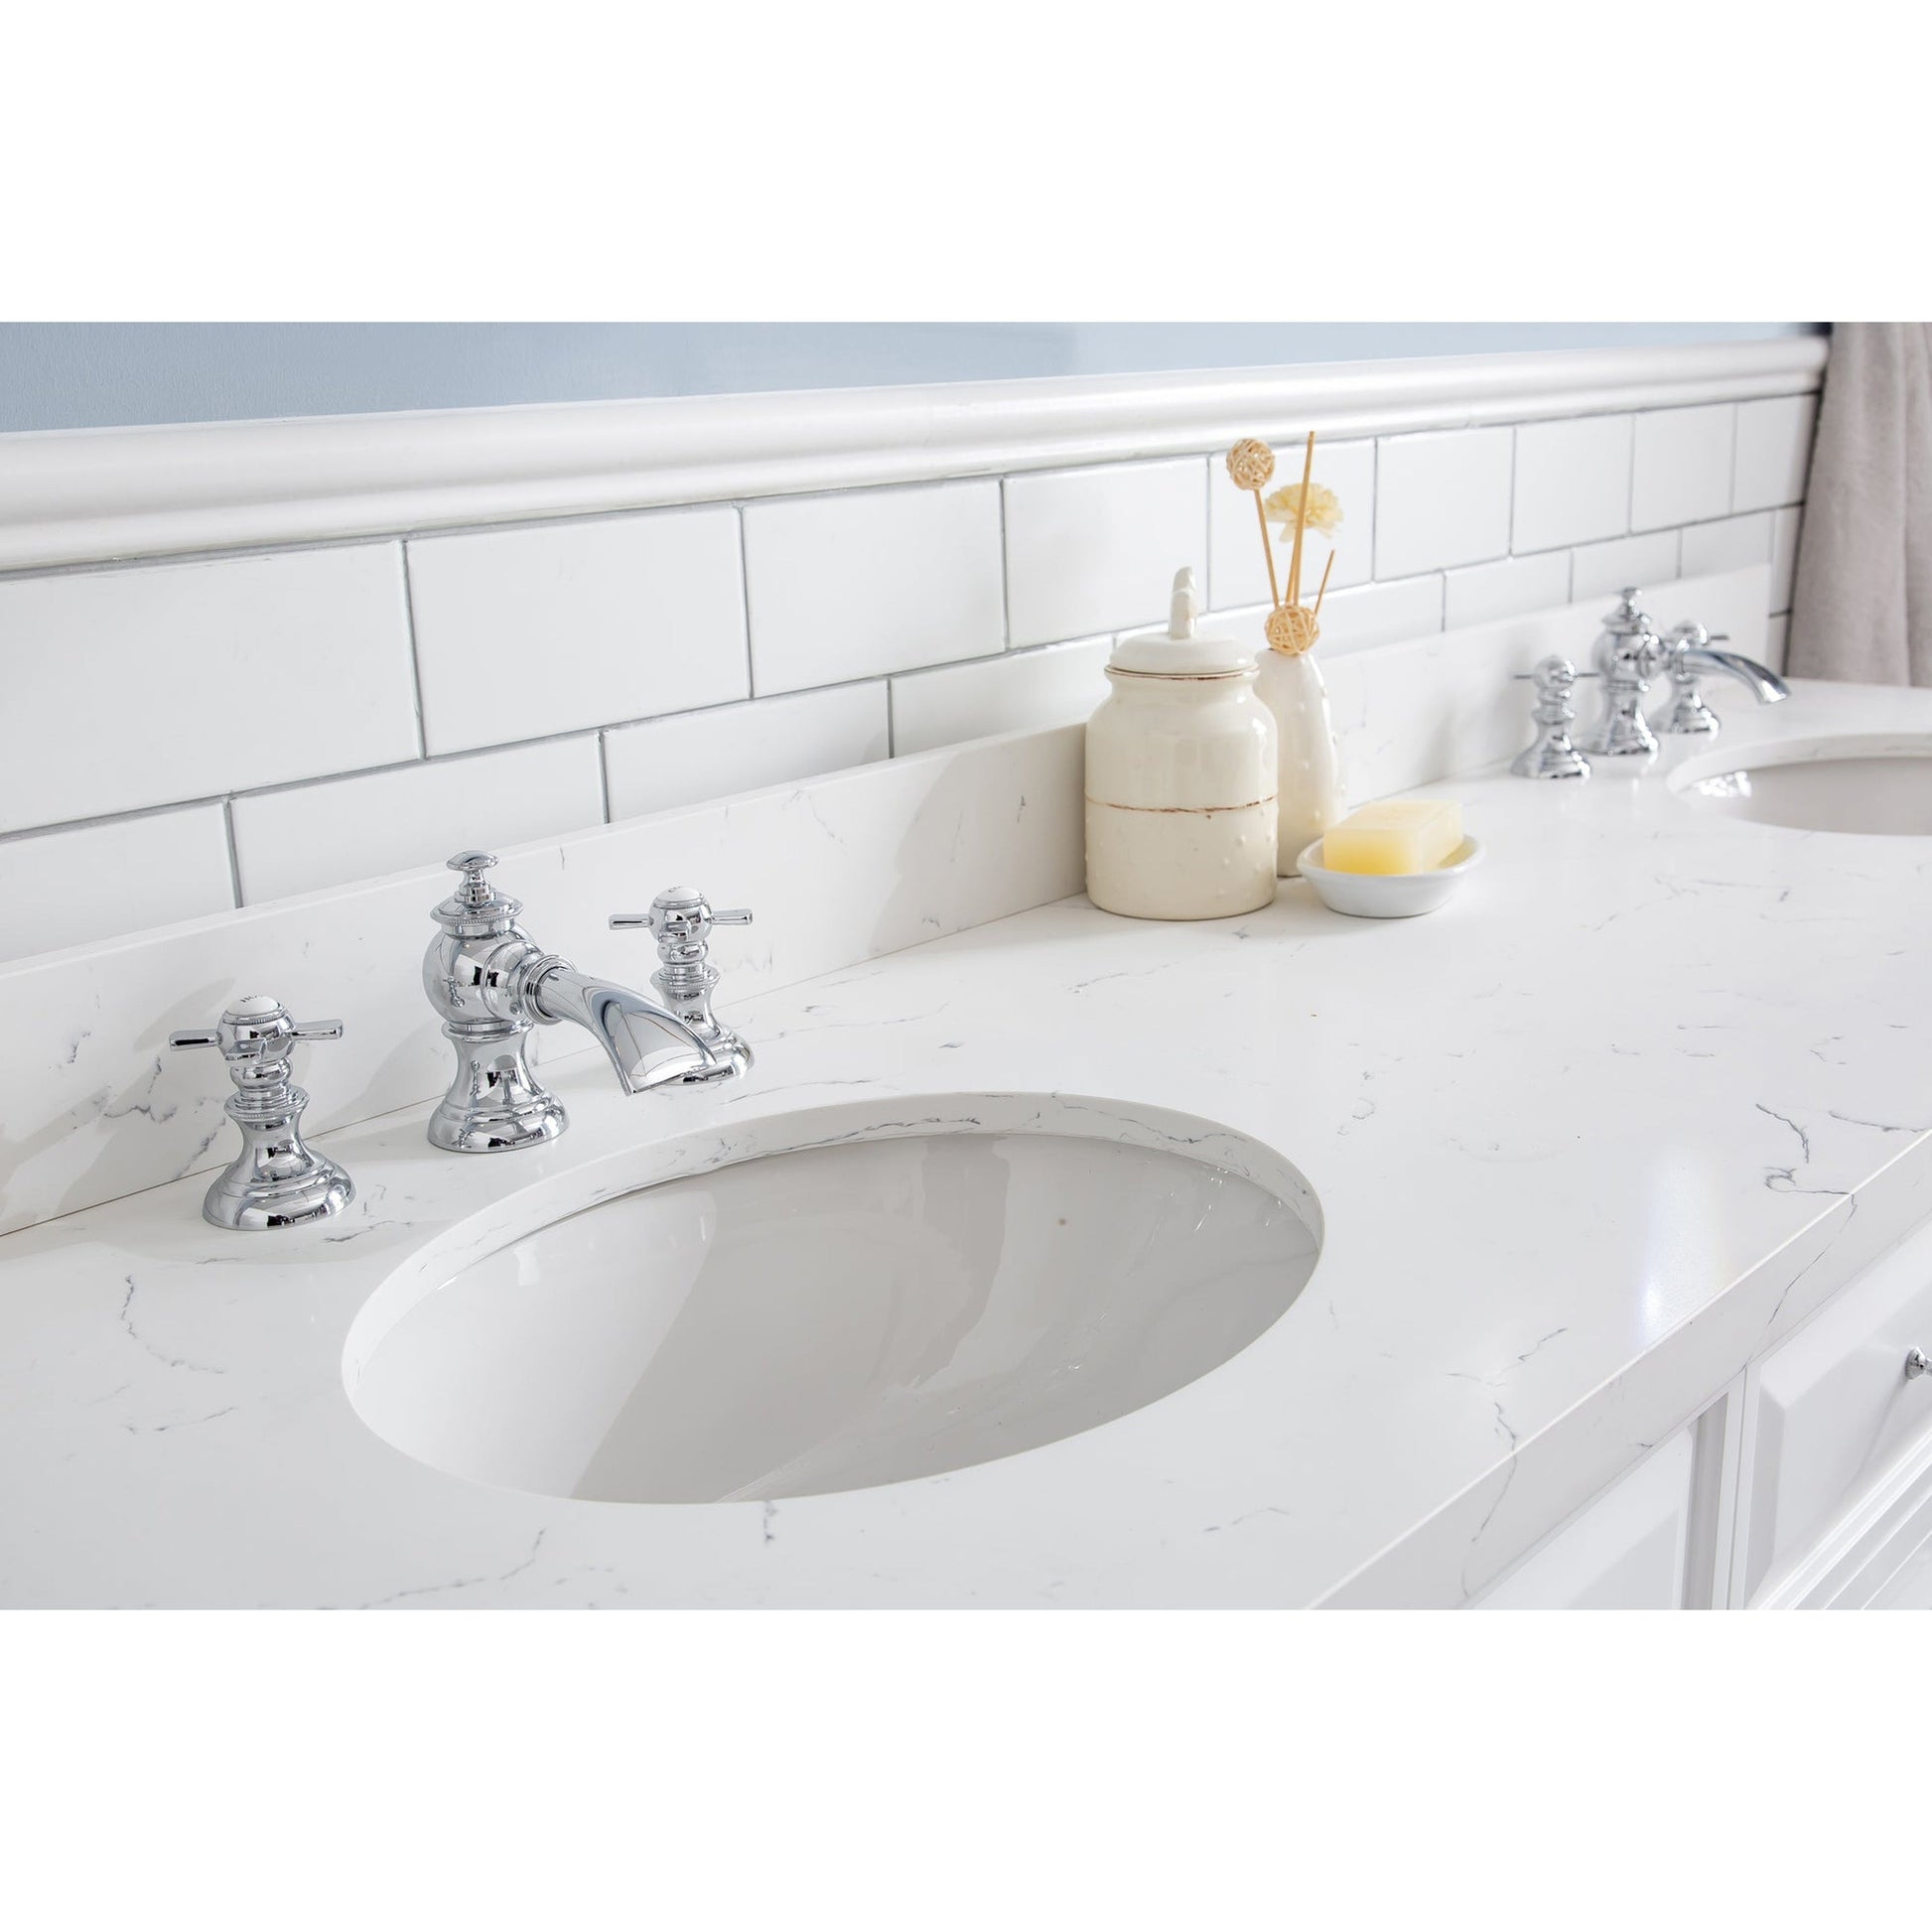 Water Creation Palace 72" Quartz Carrara Pure White Bathroom Vanity Set With Hardware And F2-0013 Faucets in Chrome Finish